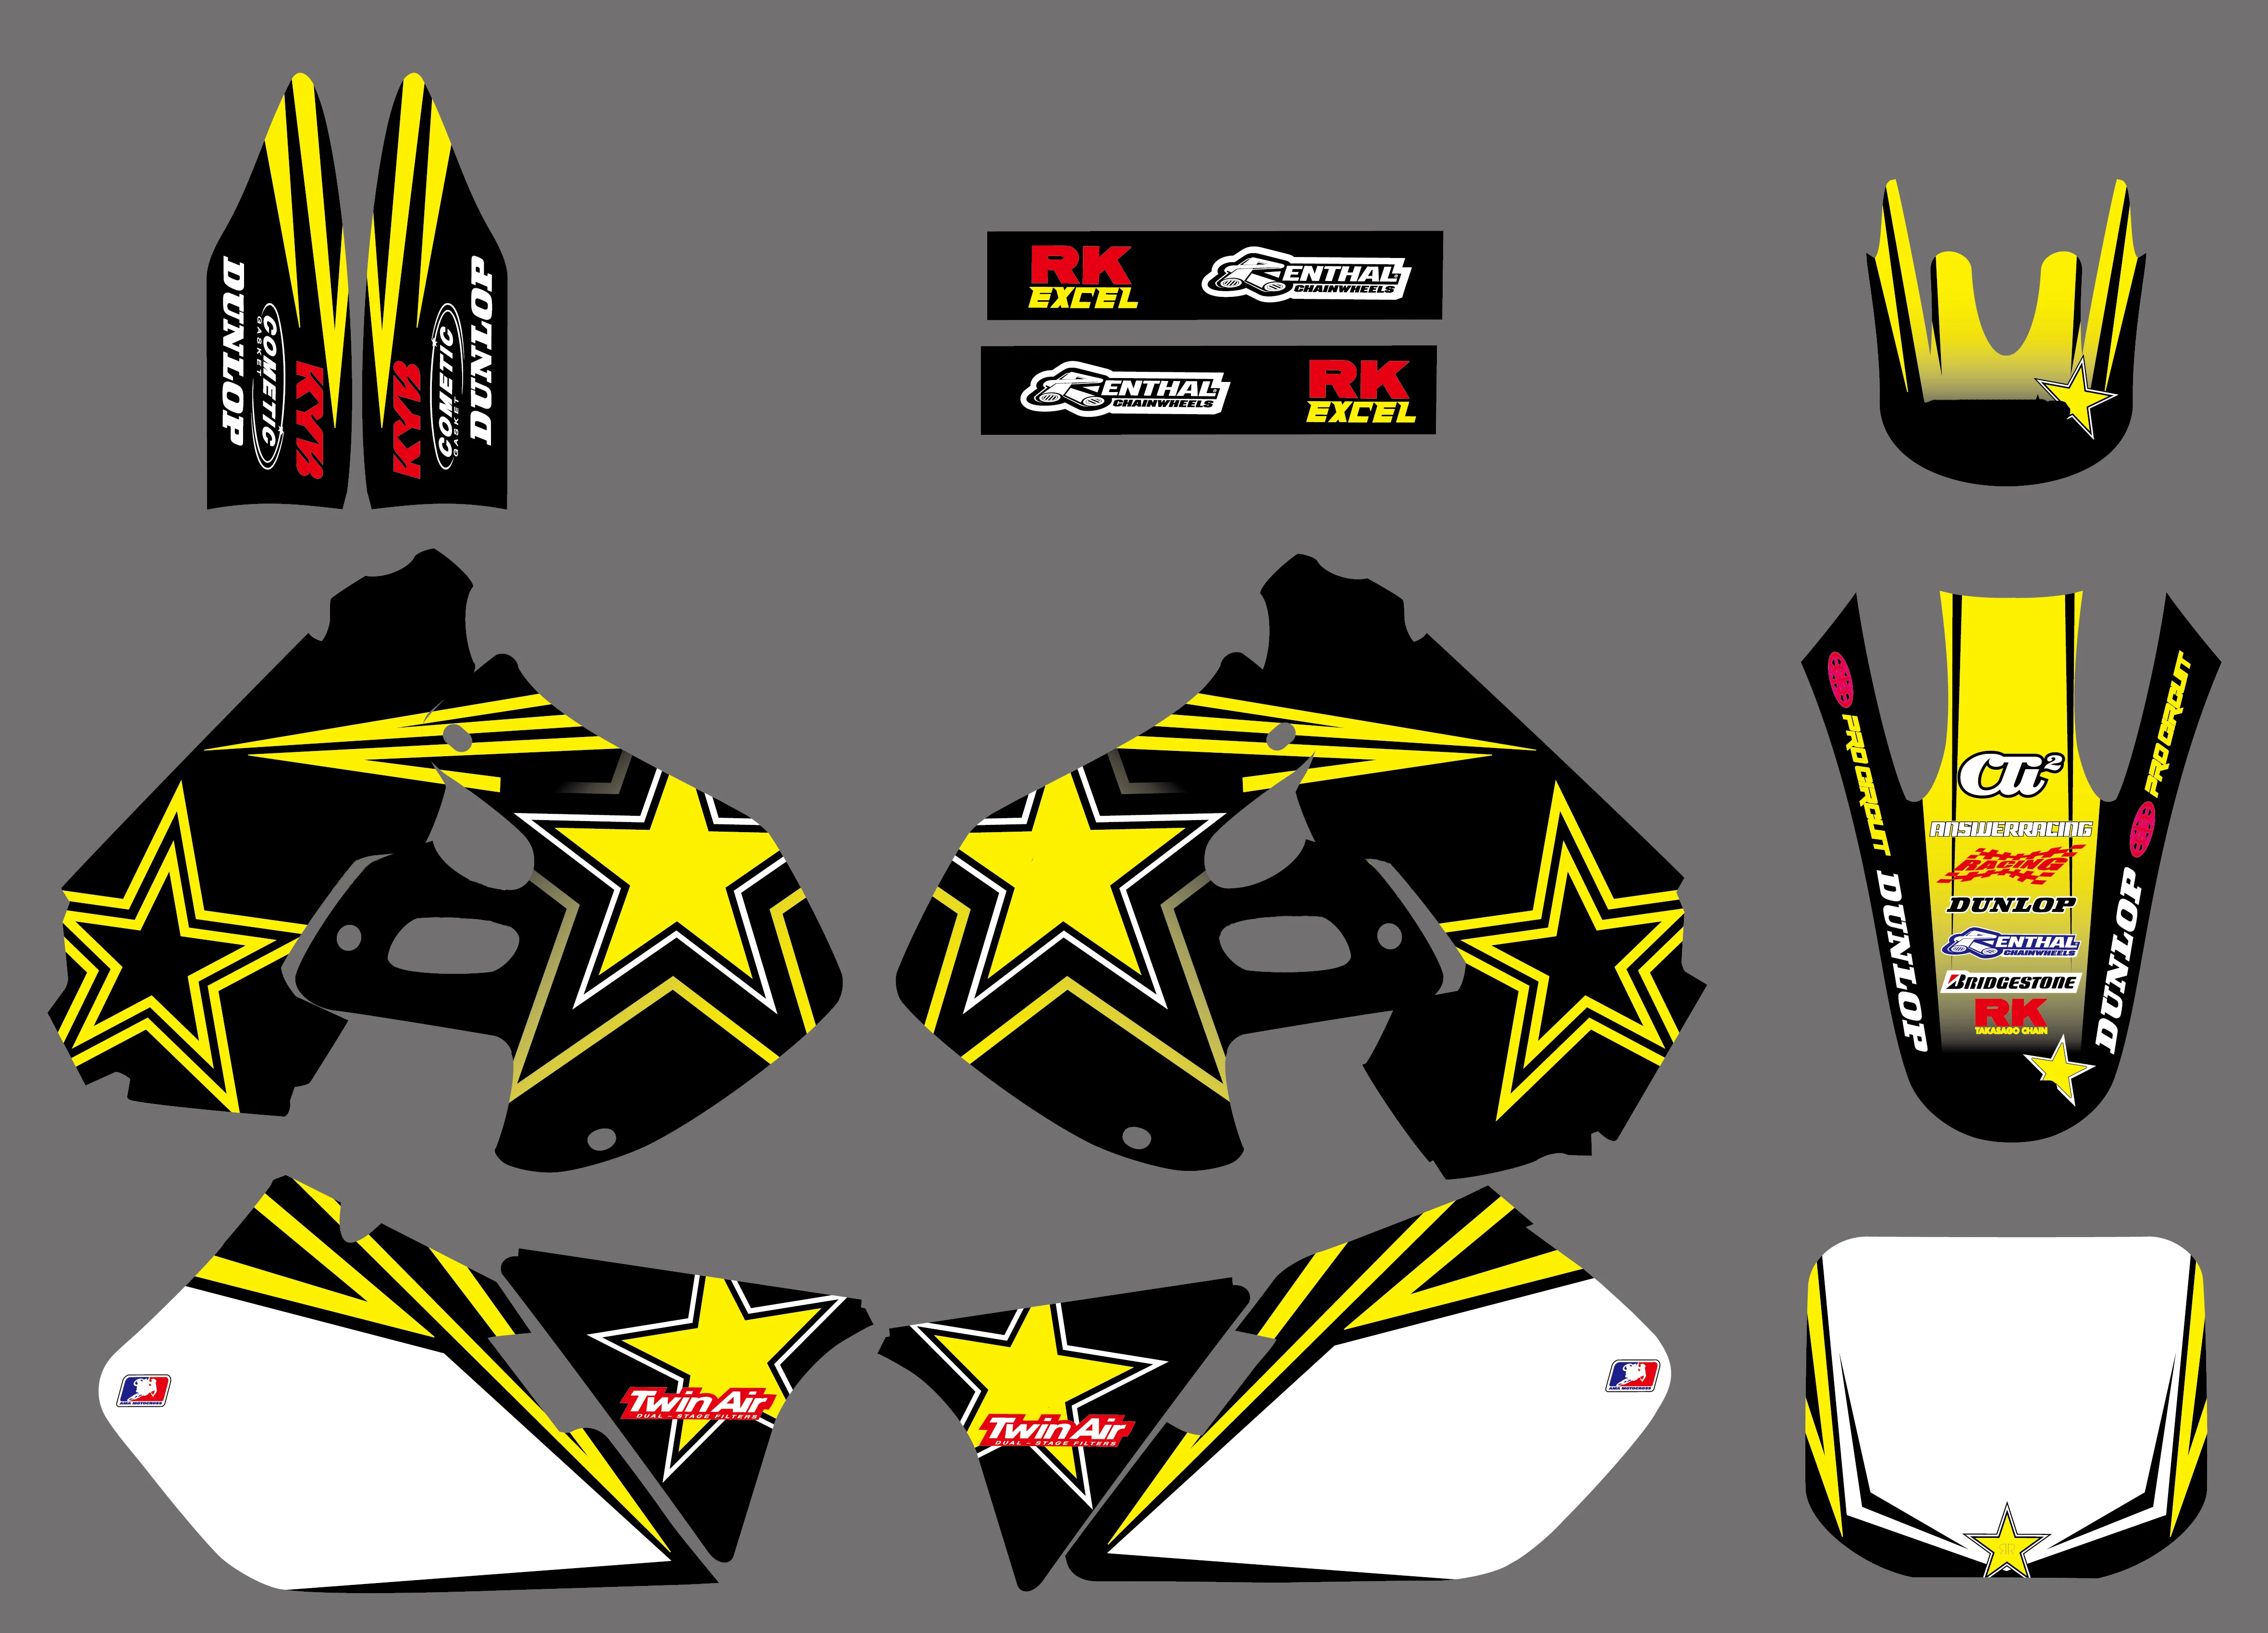 Details about   1996 1997 1998 RM 125 250 GRAPHICS KIT RM125 RM250 SUZUKI DECO DECALS STICKERS